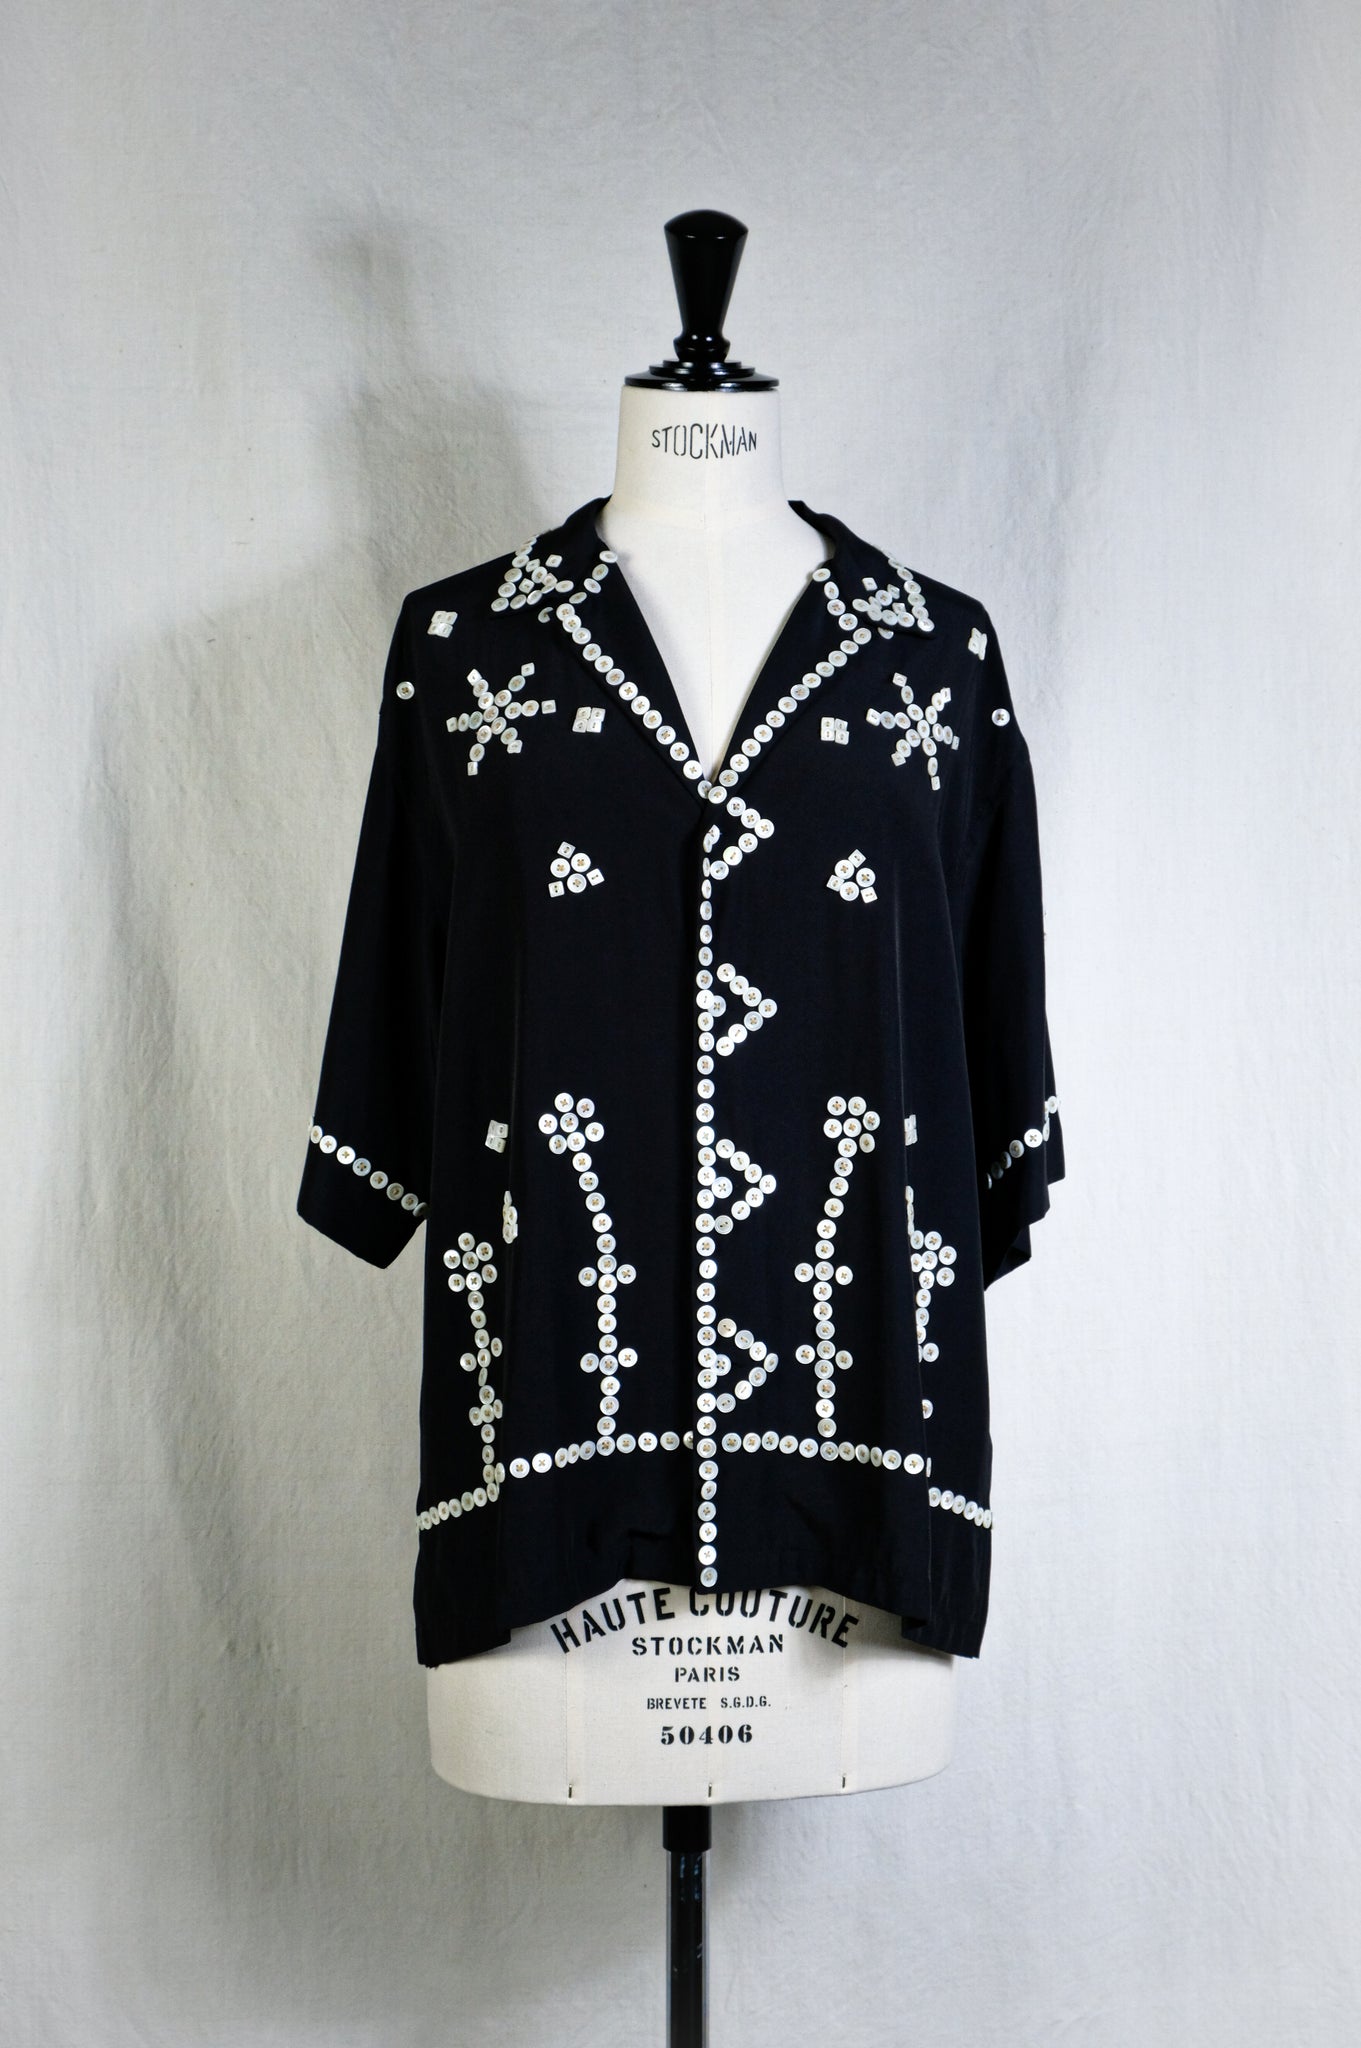 CURRENTAGE"PEARLY KING AND QUEENS SHORT SLEEVE SHIRT"